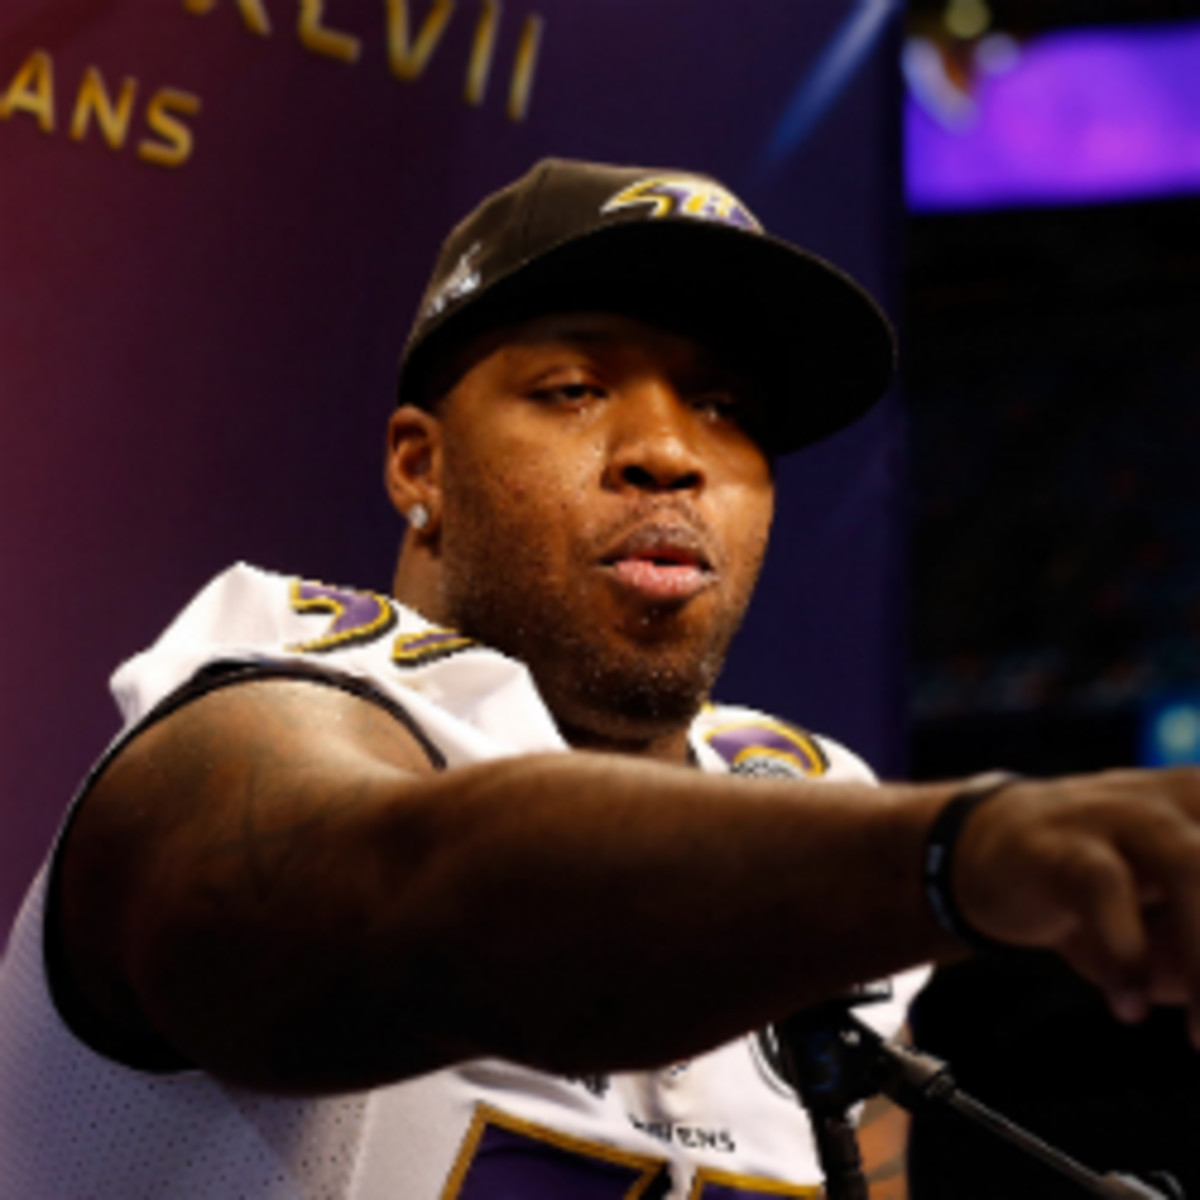 Terrell Suggs responded to Chris Culliver on Thursday, saying the Ravens would welcome a gay teammate. (Scott Halleran/Getty Images)